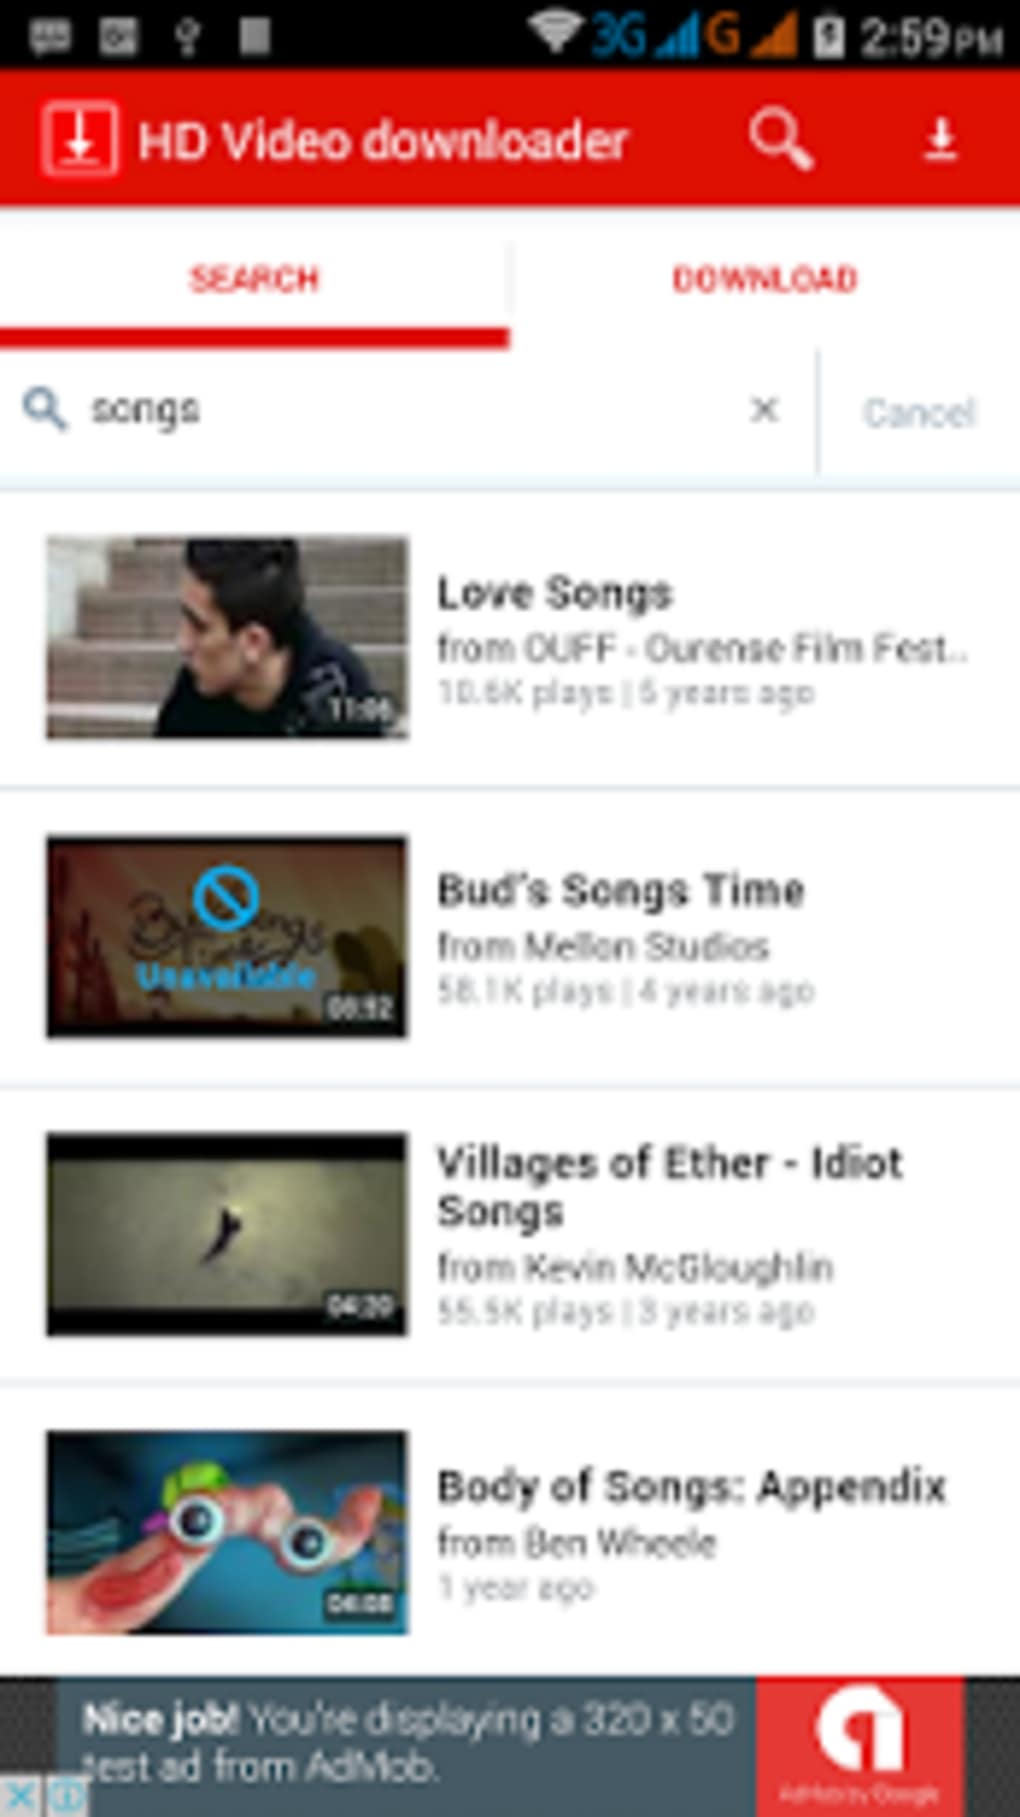 HD Video downloader free APK for Android - Download